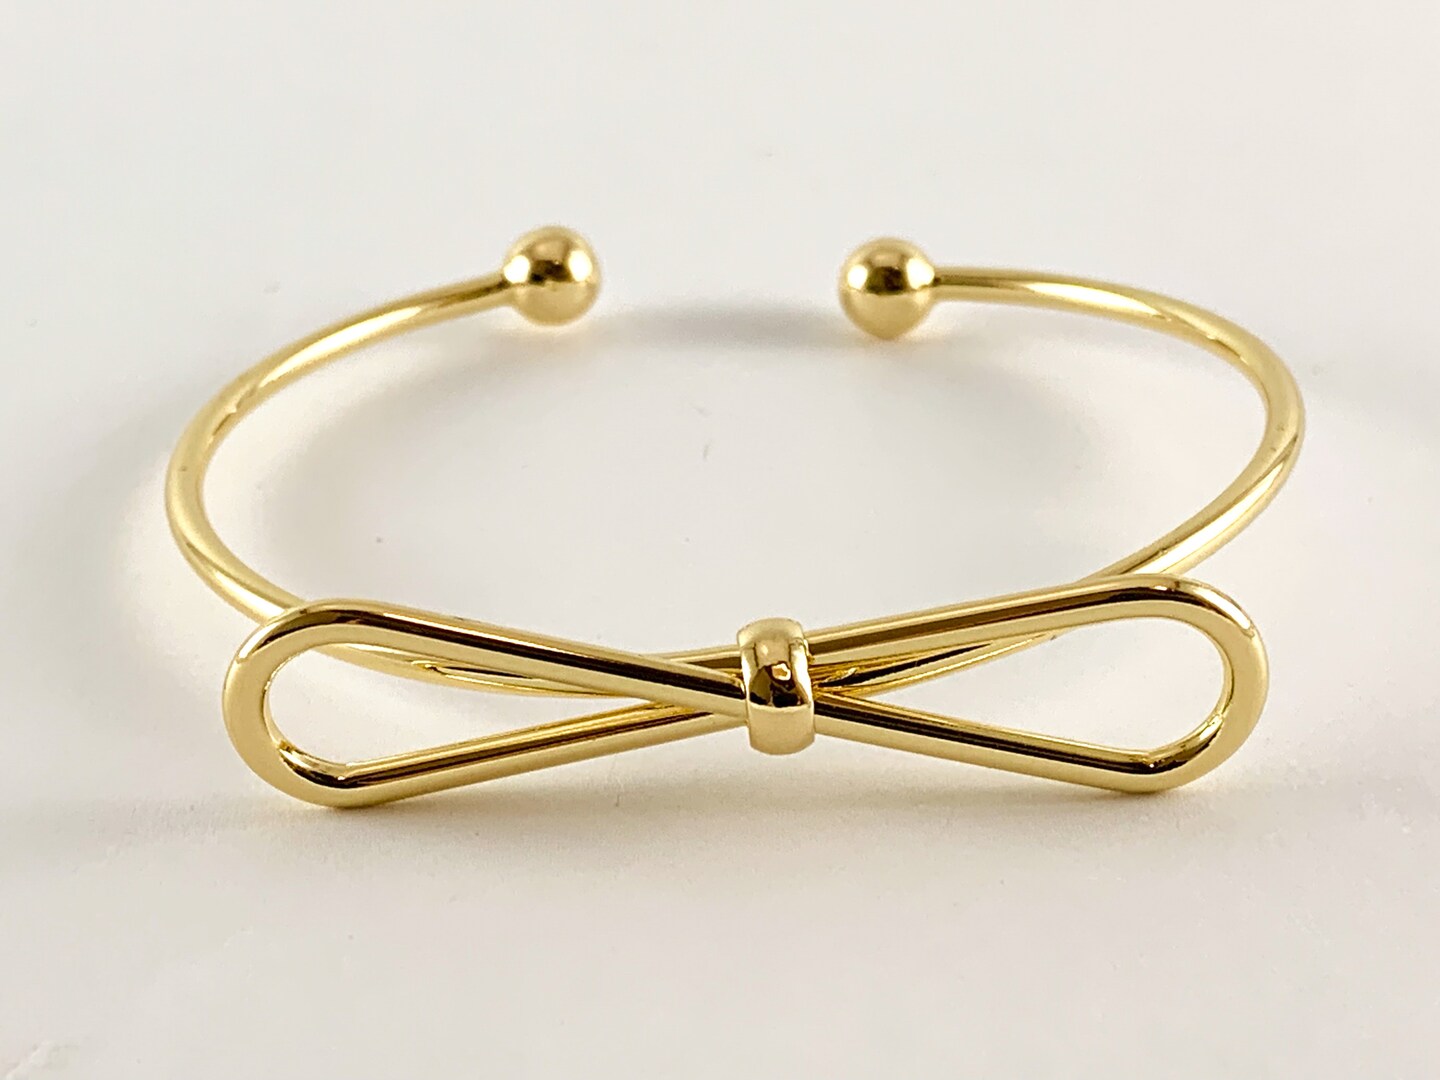 Real Gold 18K Plated Copper Bow Tie Adjustable Bracelet Cuffs 1 pc